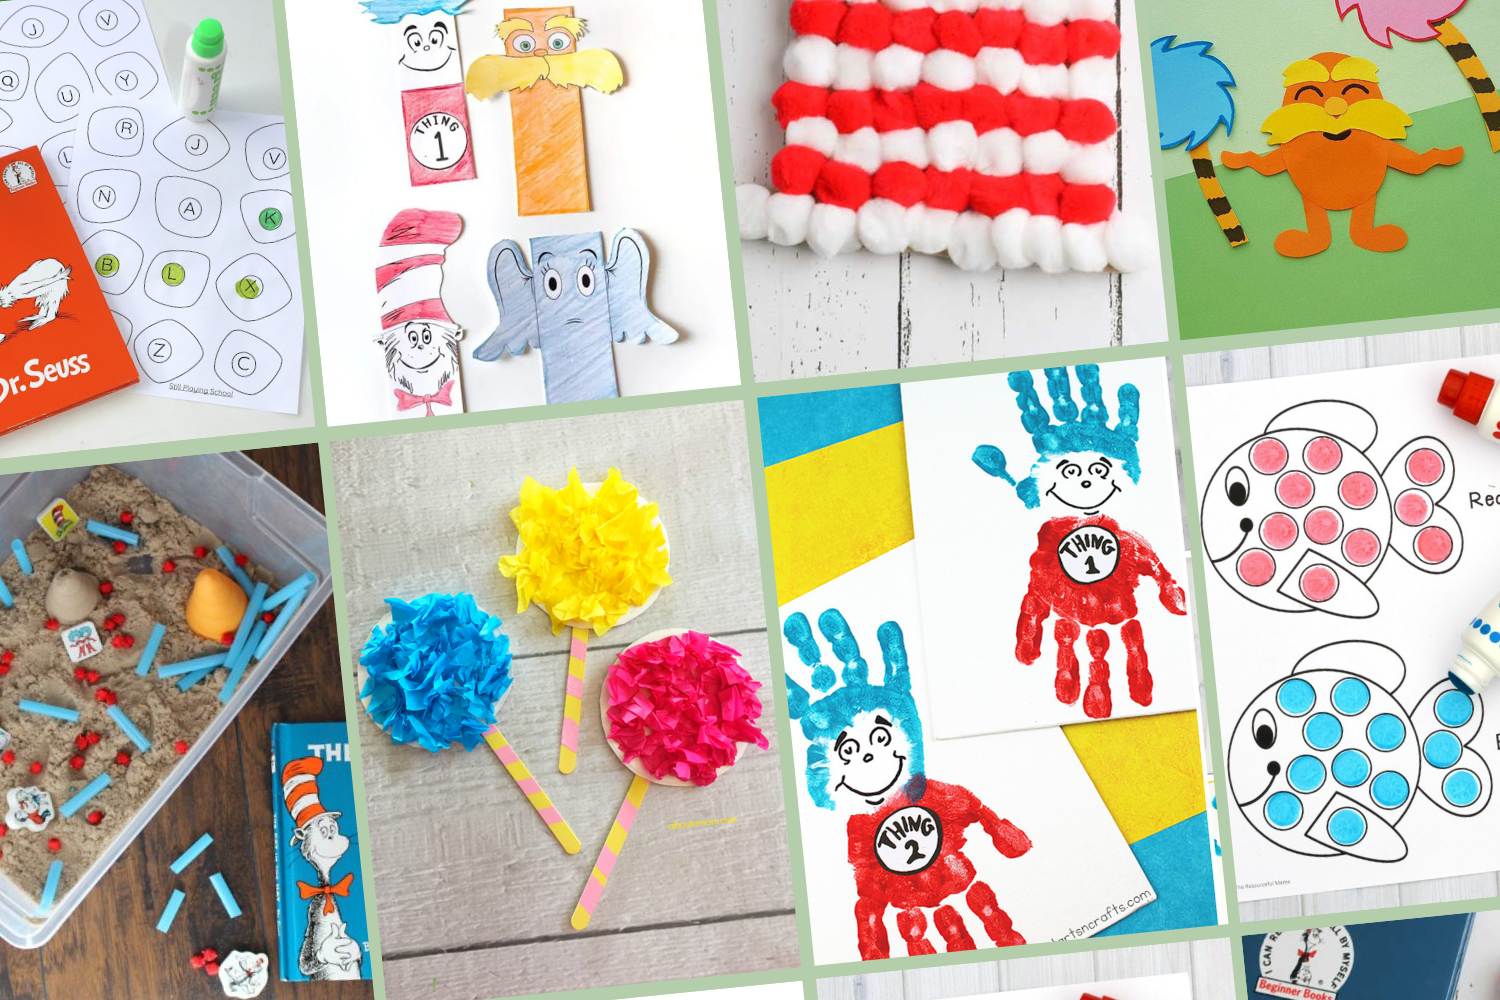 What to Make with Popsicle Sticks: 50+ Fun Crafts for Kids